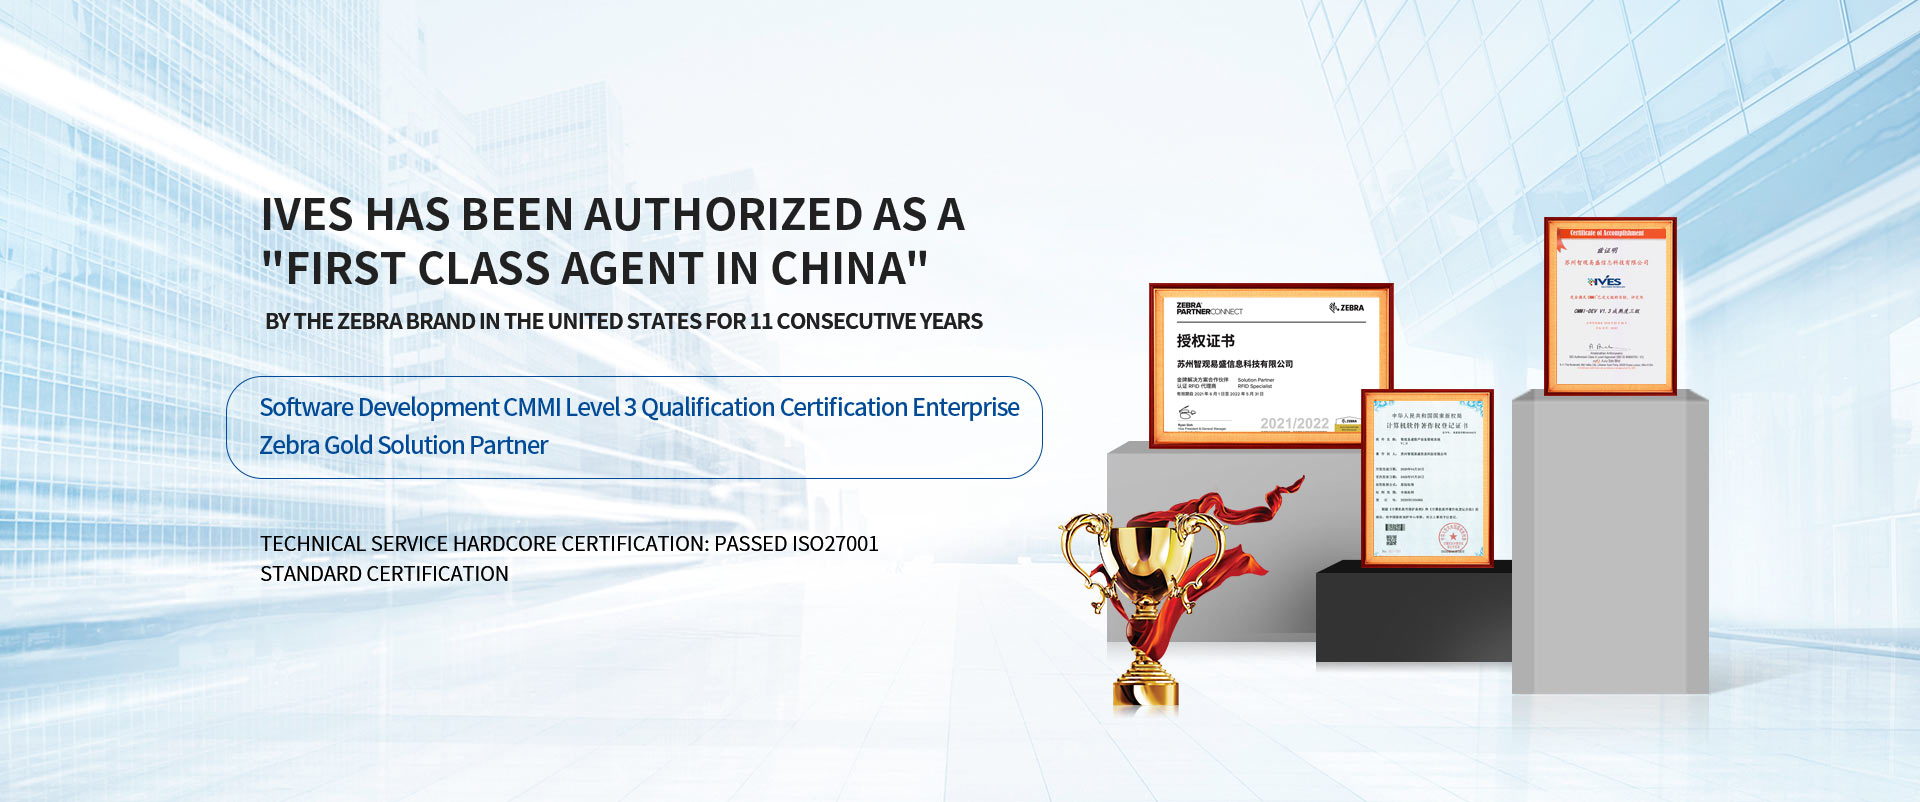 IVES has been authorized as a "First Class Agent in China" by the Zebra brand in the United States for 11 consecutive years